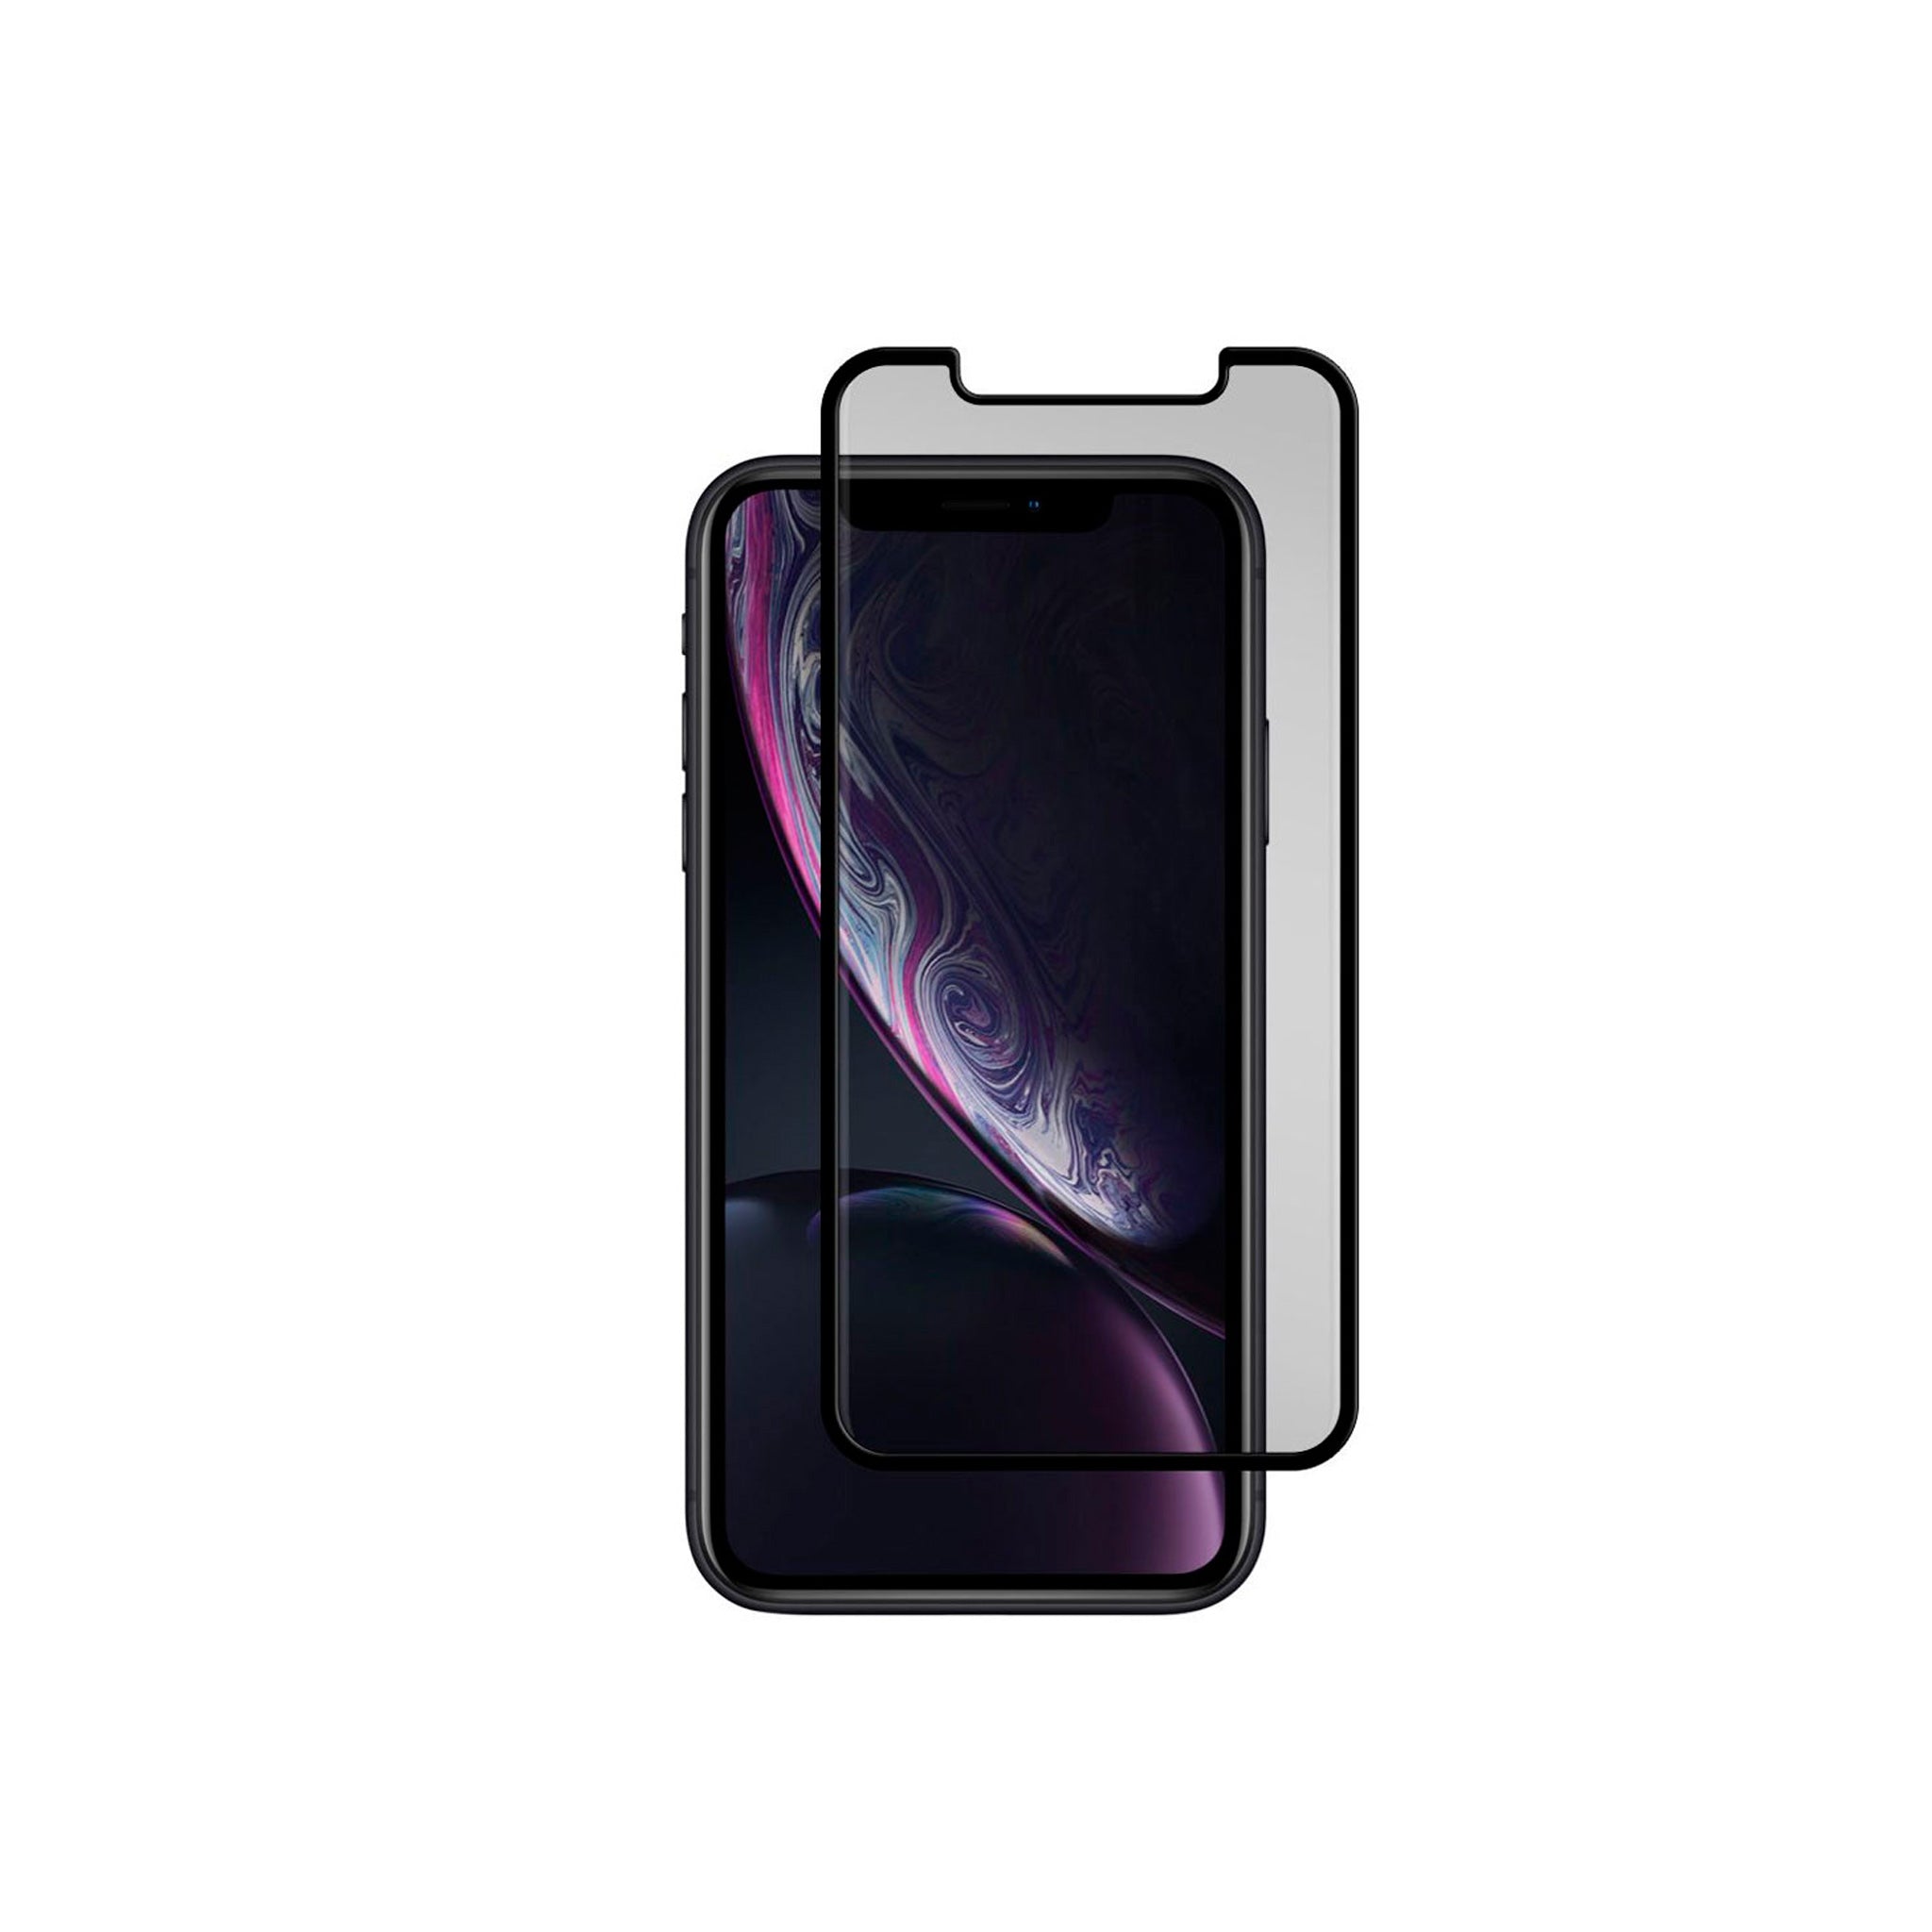 Gadget Guard - Black Ice Cornice Curved Glass Screen Protector for Apple iPhone 11 / XR - Clear